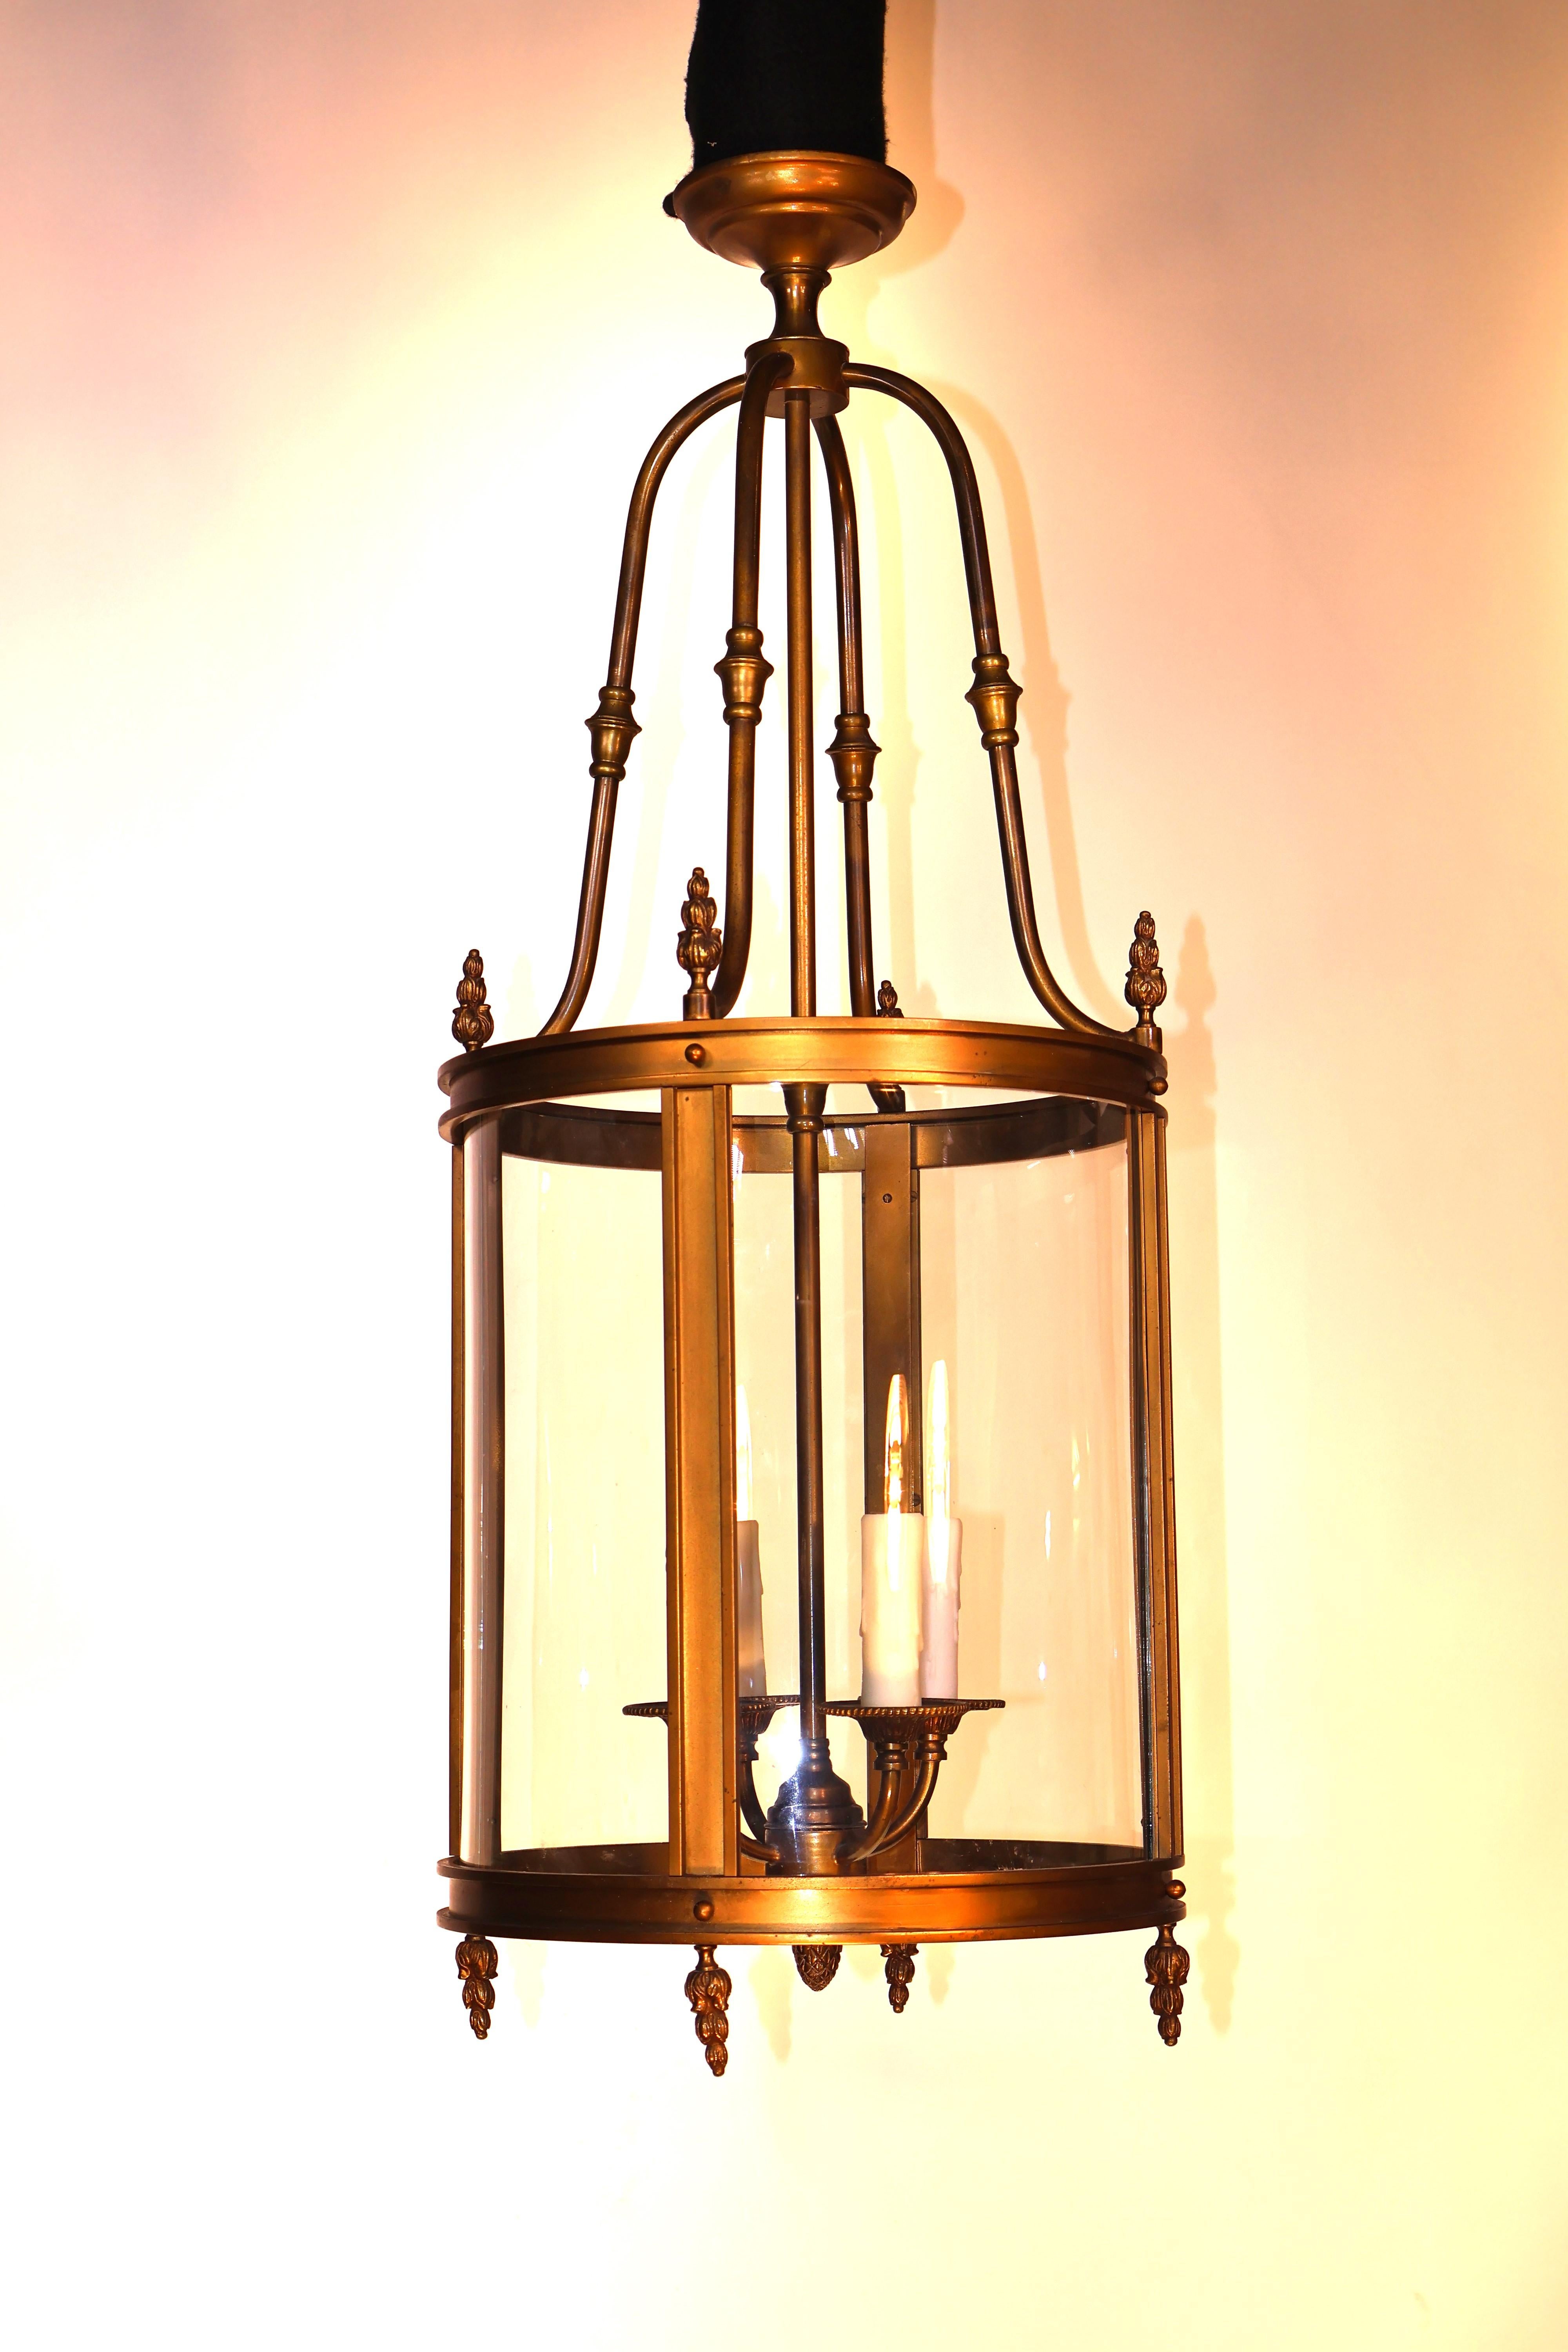 A Fine, Elegant and very simple cylindrical lantern, gilt bronze with curved glass panels. 4 lights. France, circa 1930.
Dimensions: Height 37 1/2